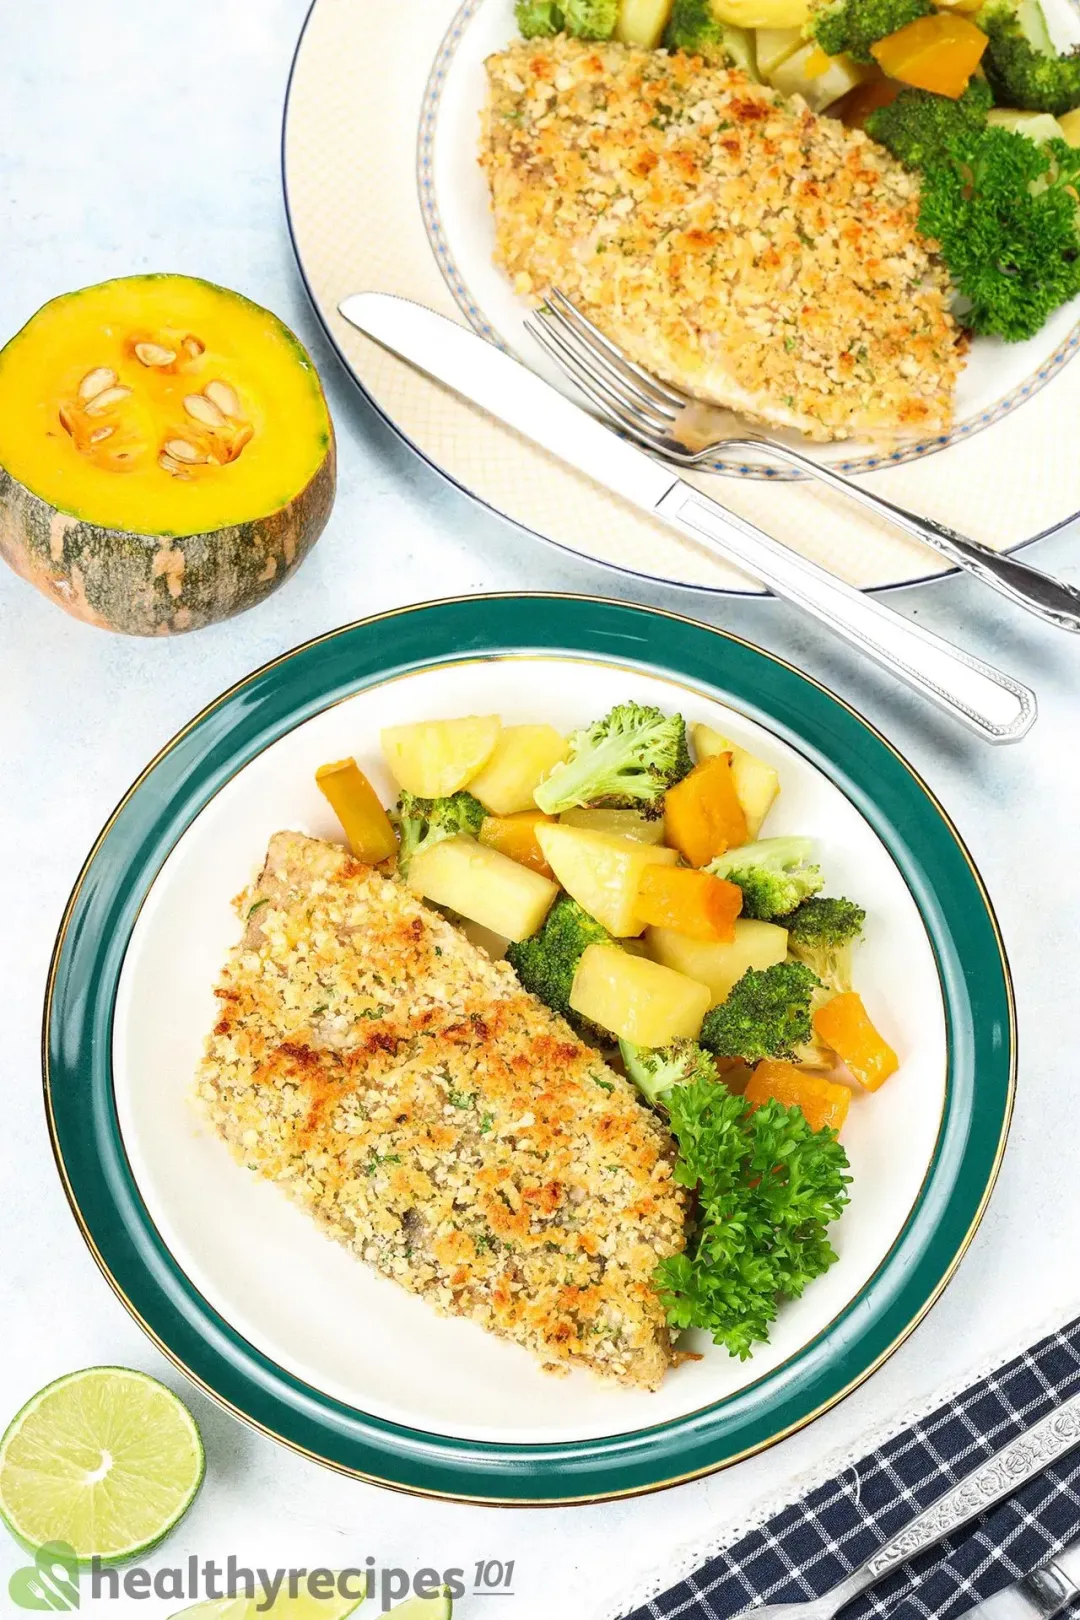 What to Serve With Parmesan Crusted Sea Bass